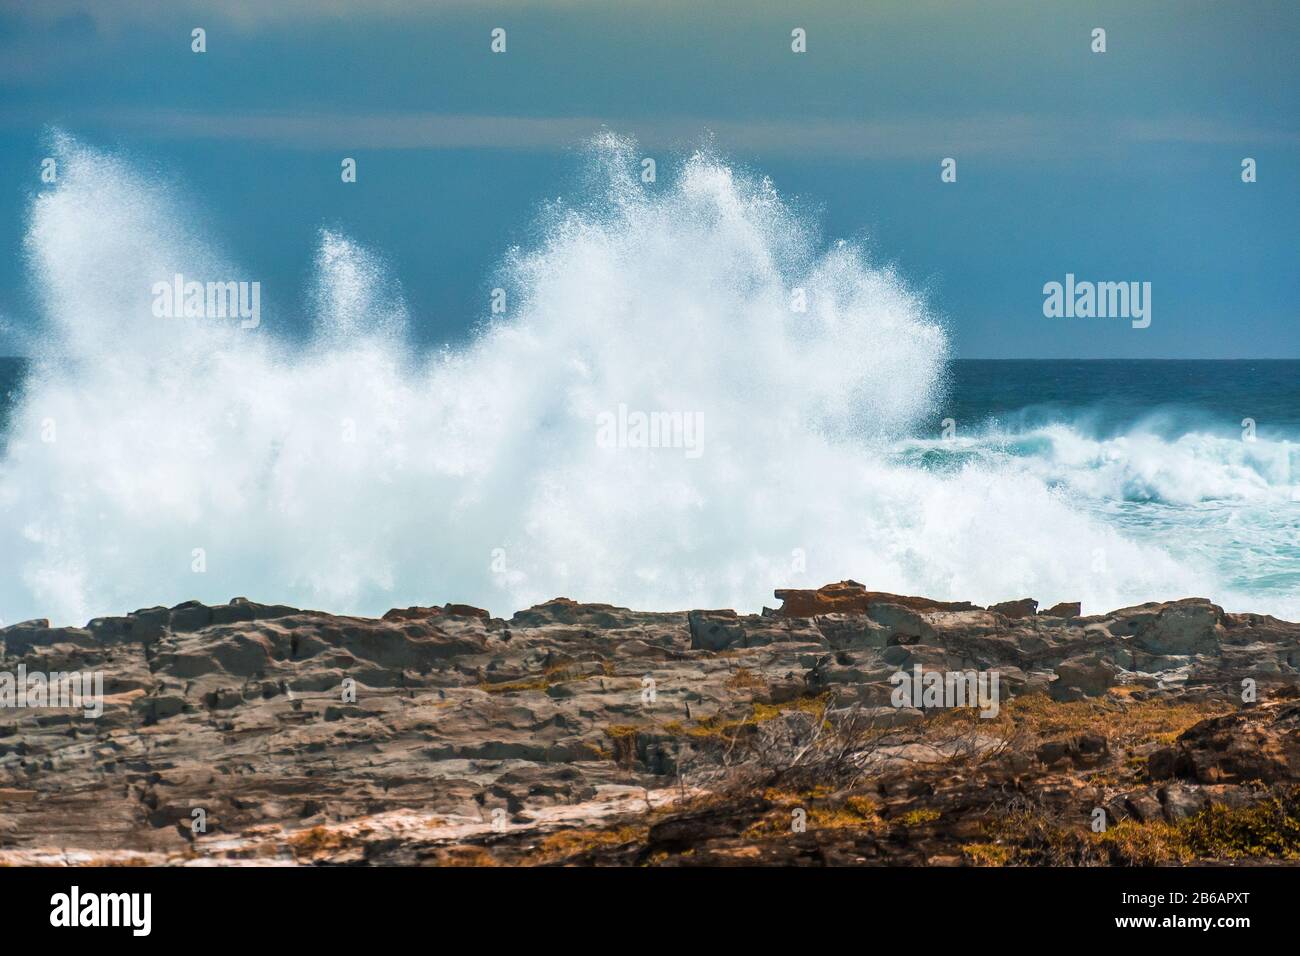 An enormous wave crashing against the rocks at Storms River Mouth, Tsitsikamma National Park, South Africa Stock Photo